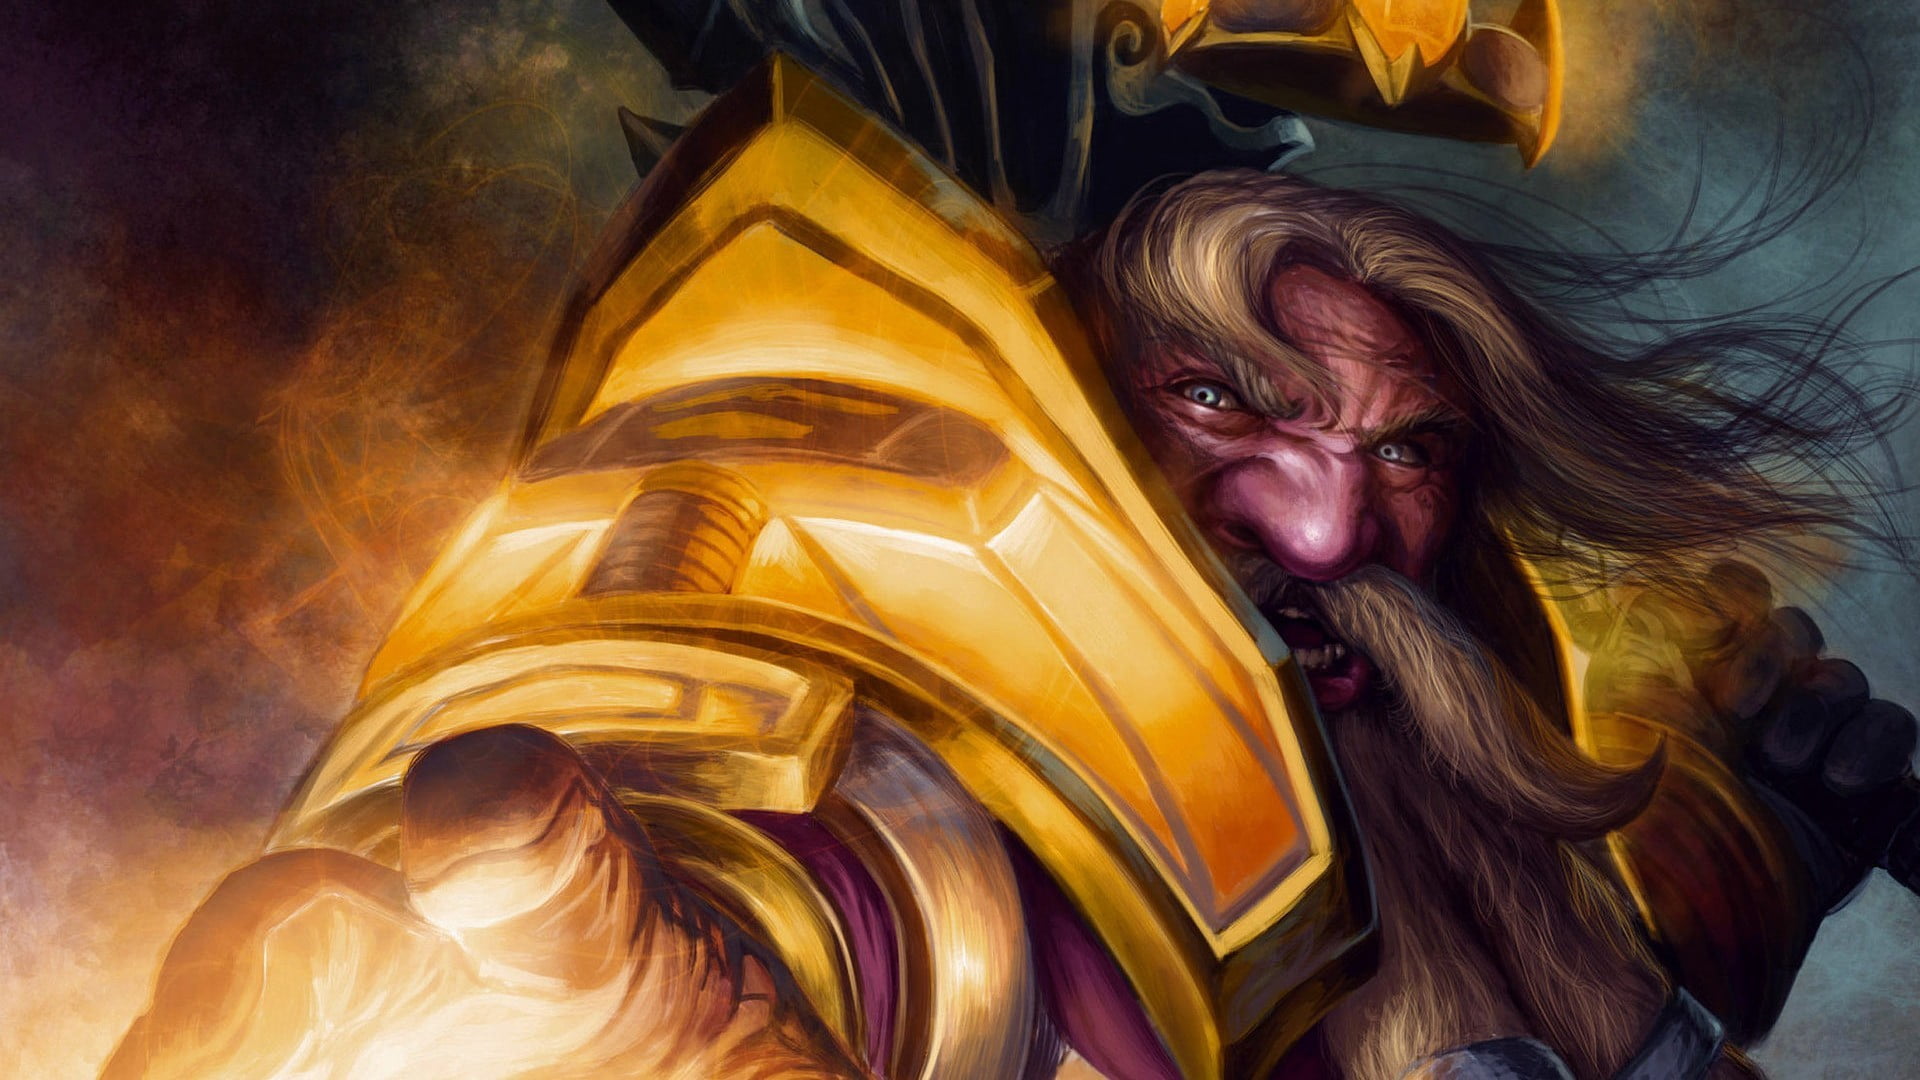 dwarf with gold armory illustration, fantasy art, World of Warcraft, video ...